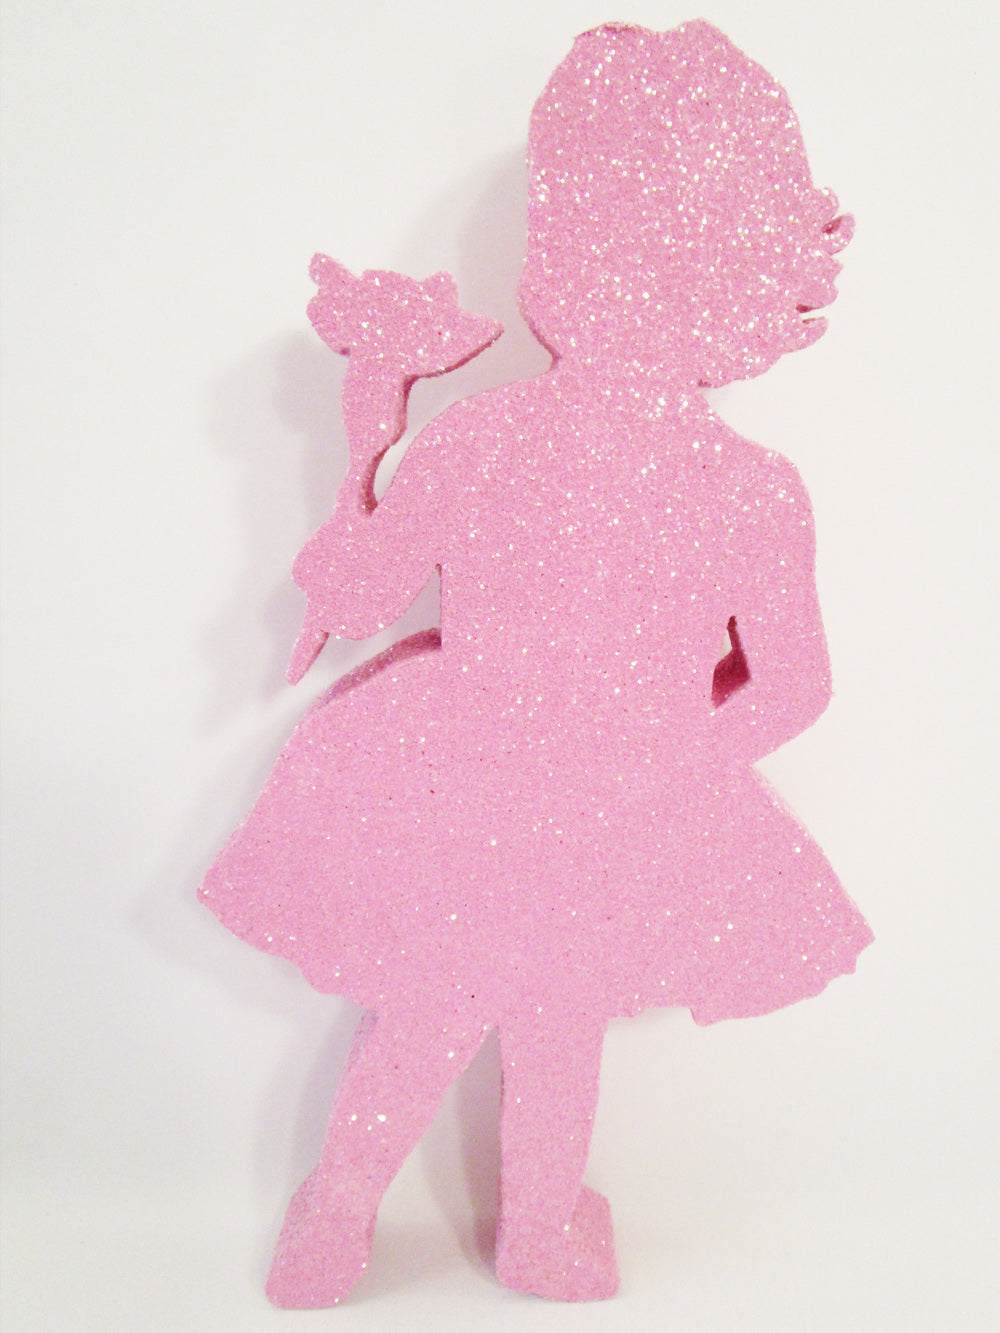 Little Girl with Flower Cutout